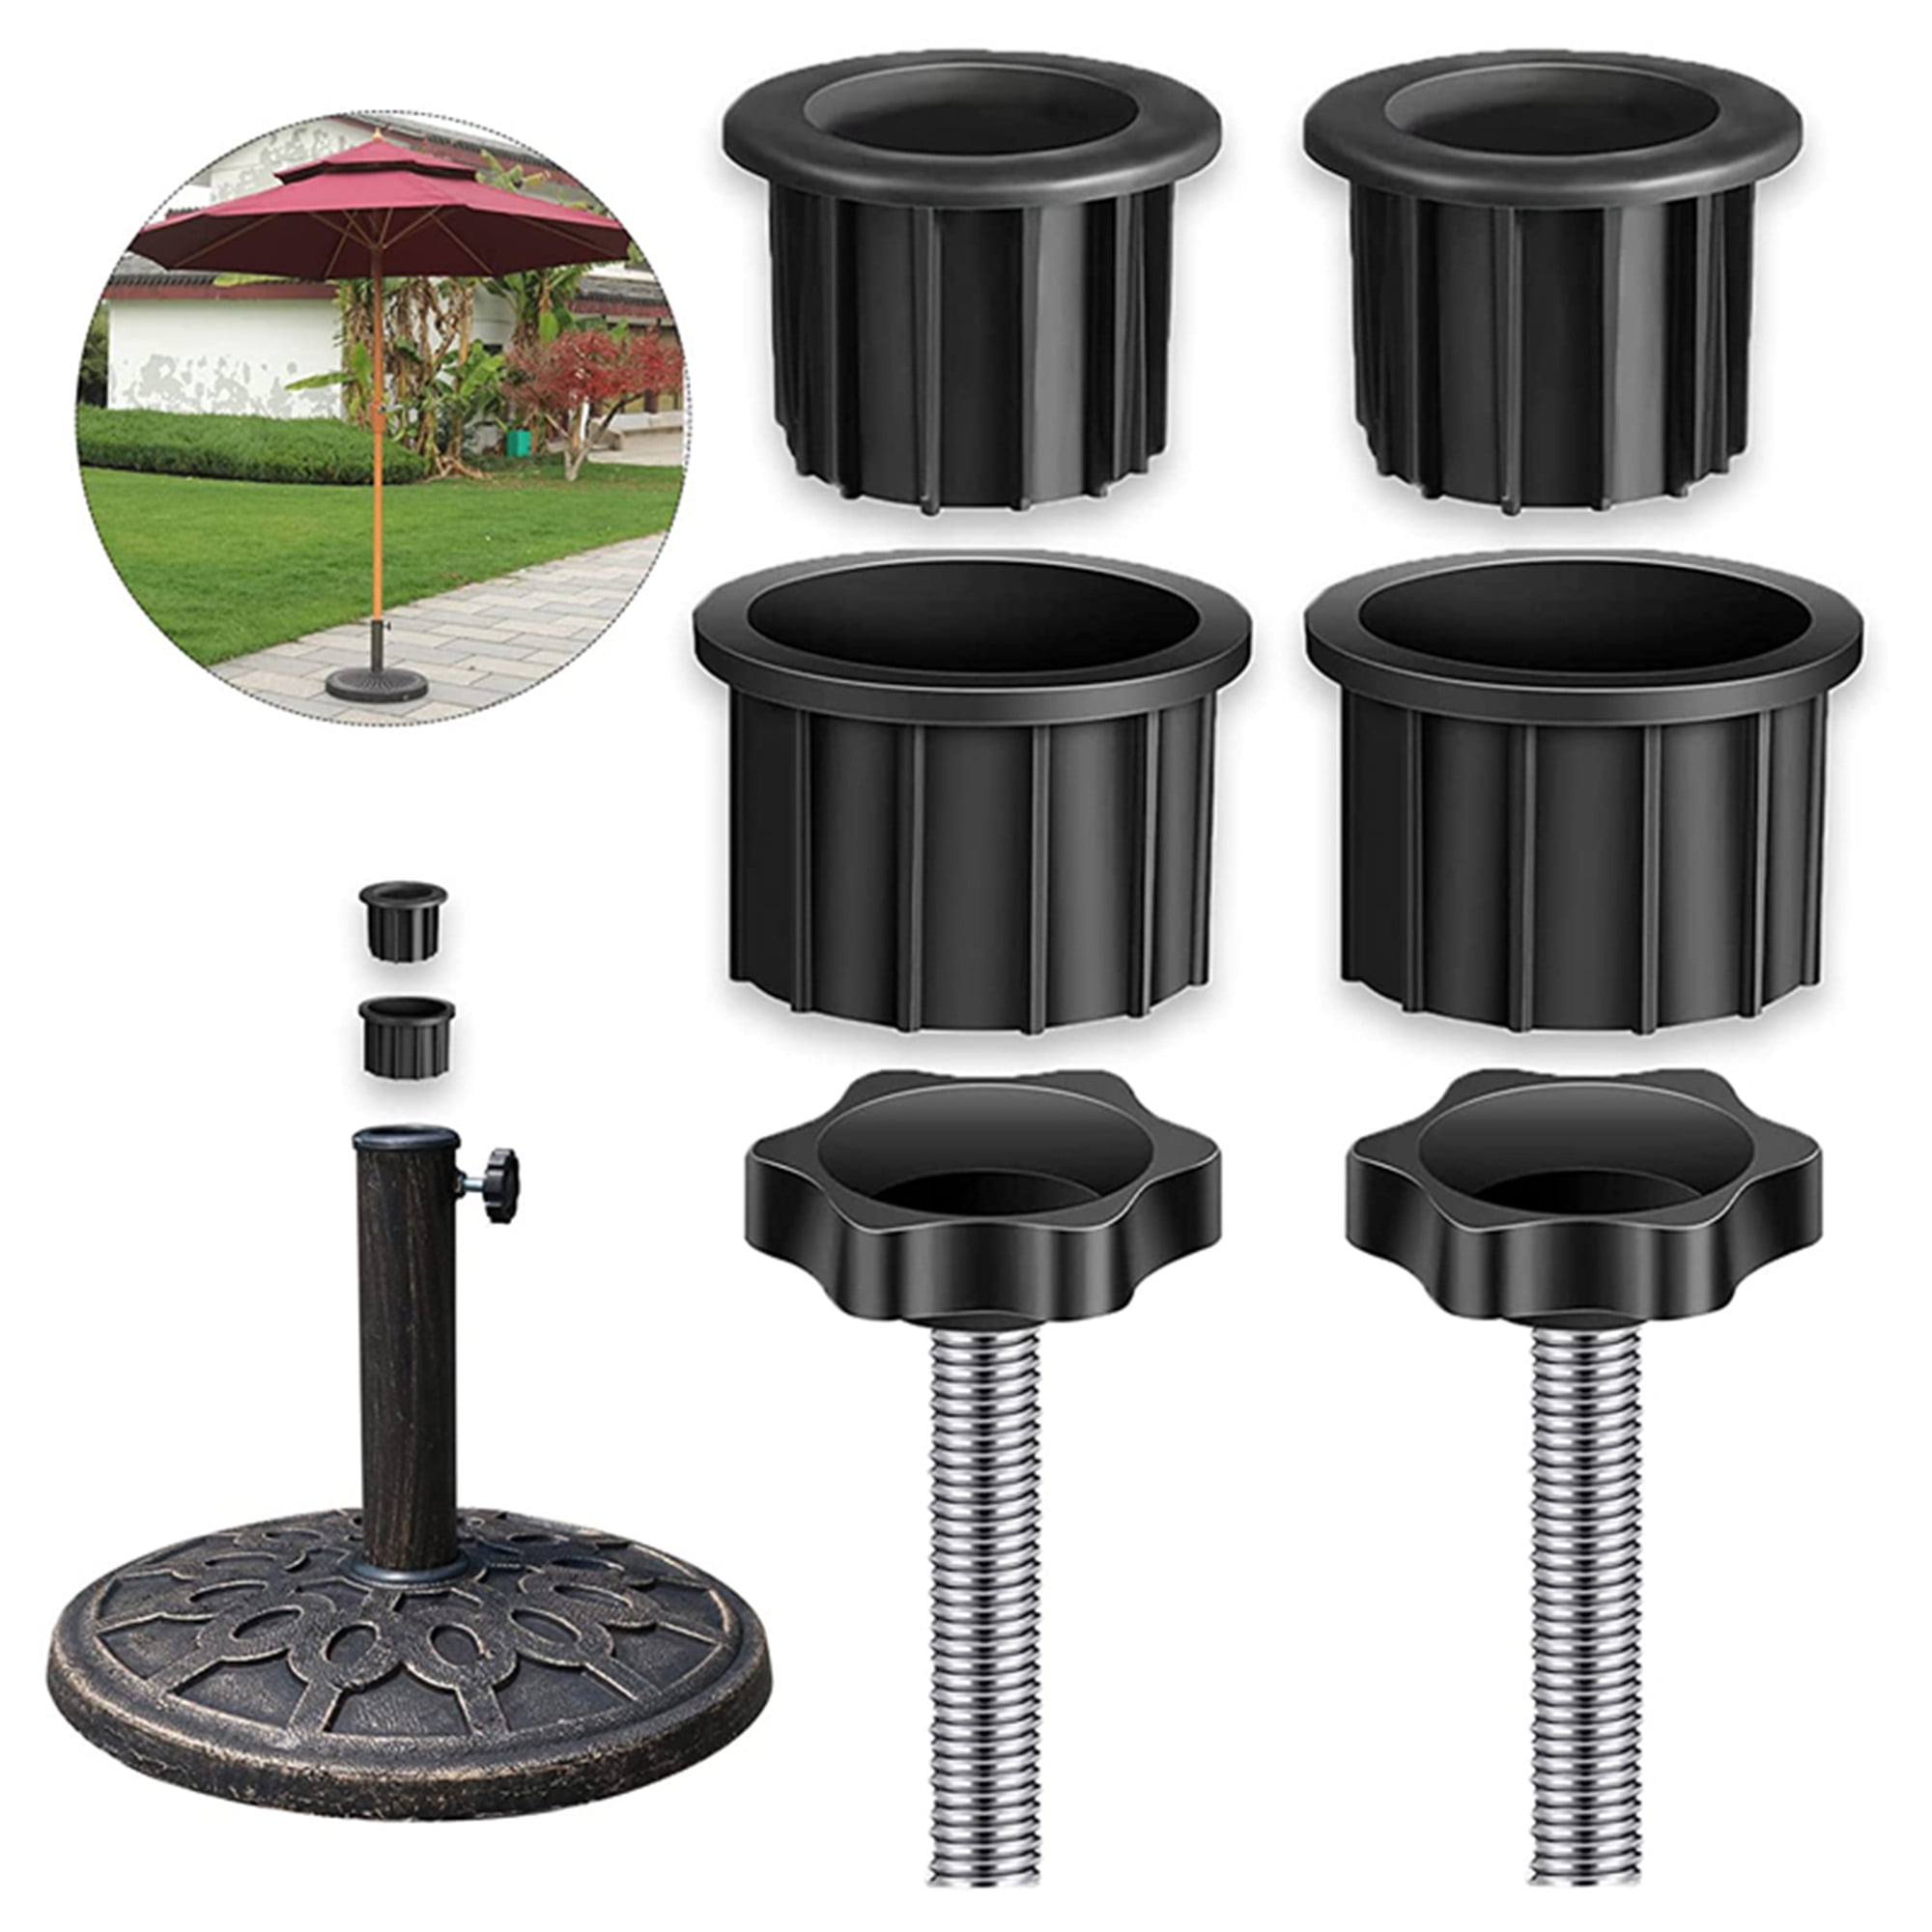 12 Pcs Patio Umbrella Parasol Base Stand Hole Ring Plug Cover Umbrella Stand Replacement Part Patio Swing Umbrella Chair Replacement Parts 